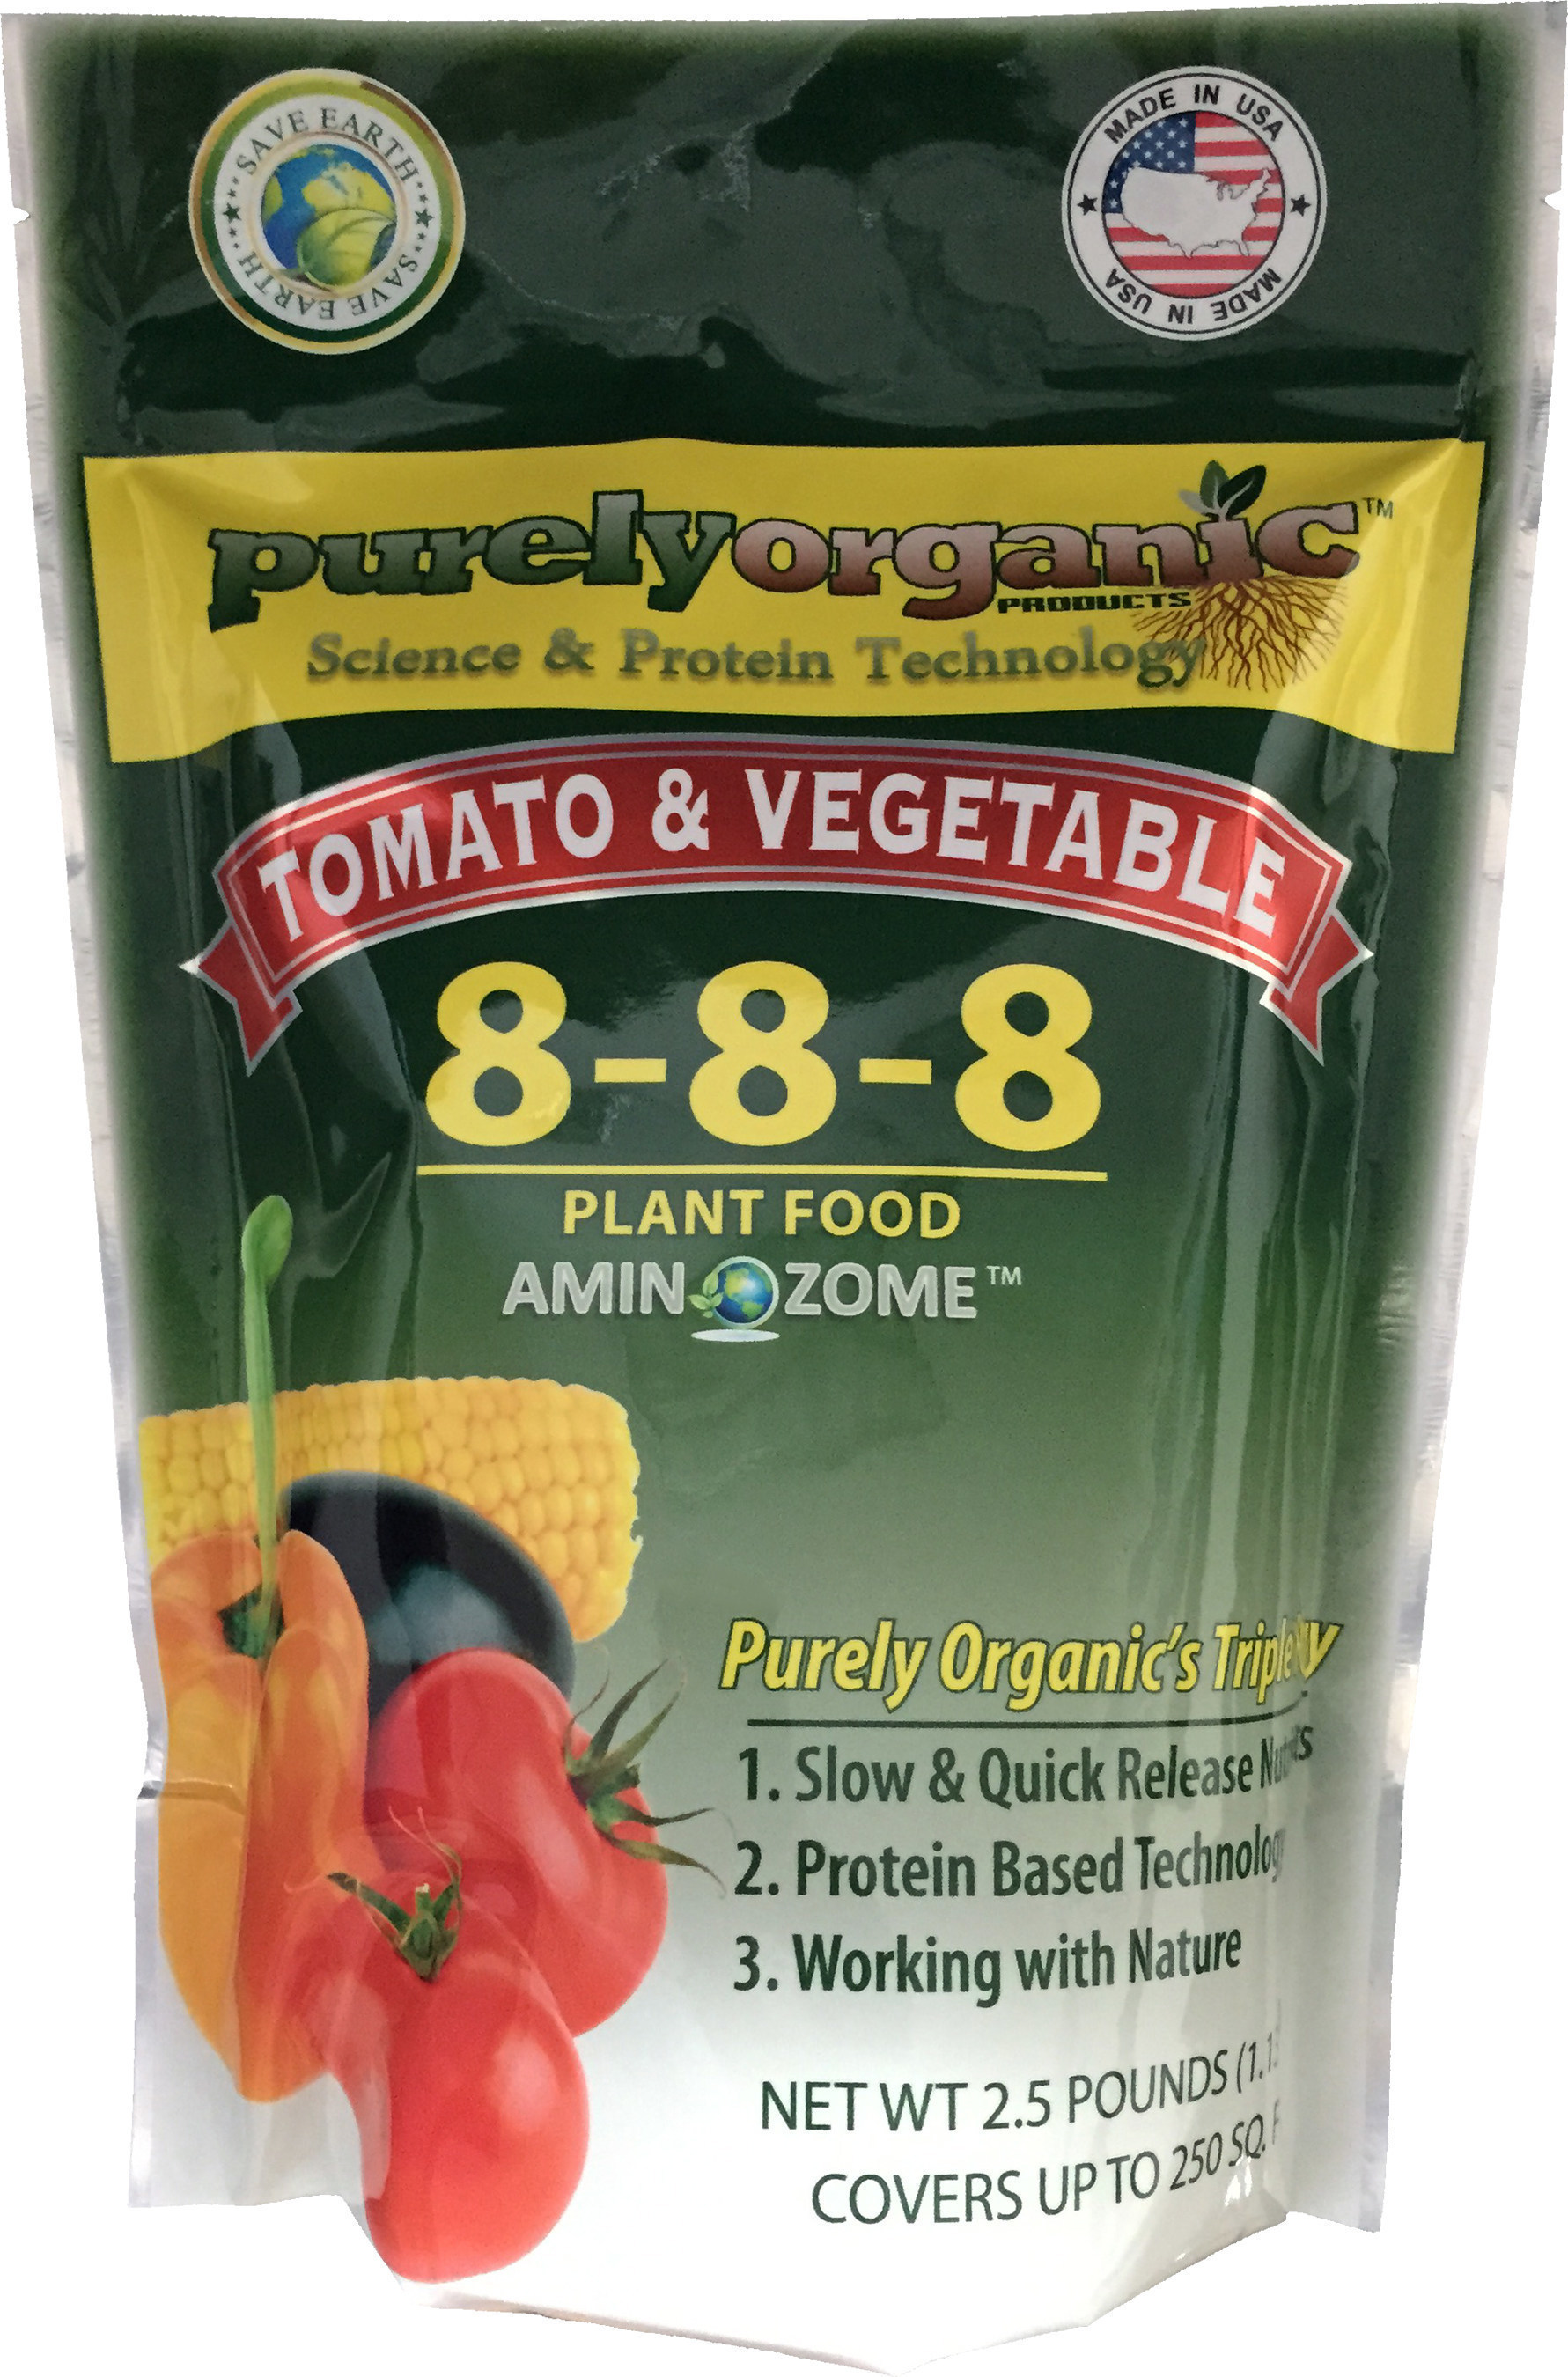 Purely Organic Products Natural 8-8-8 Tomato & Vegetable Plant Food is now available at The Home Depot stores nationwide.